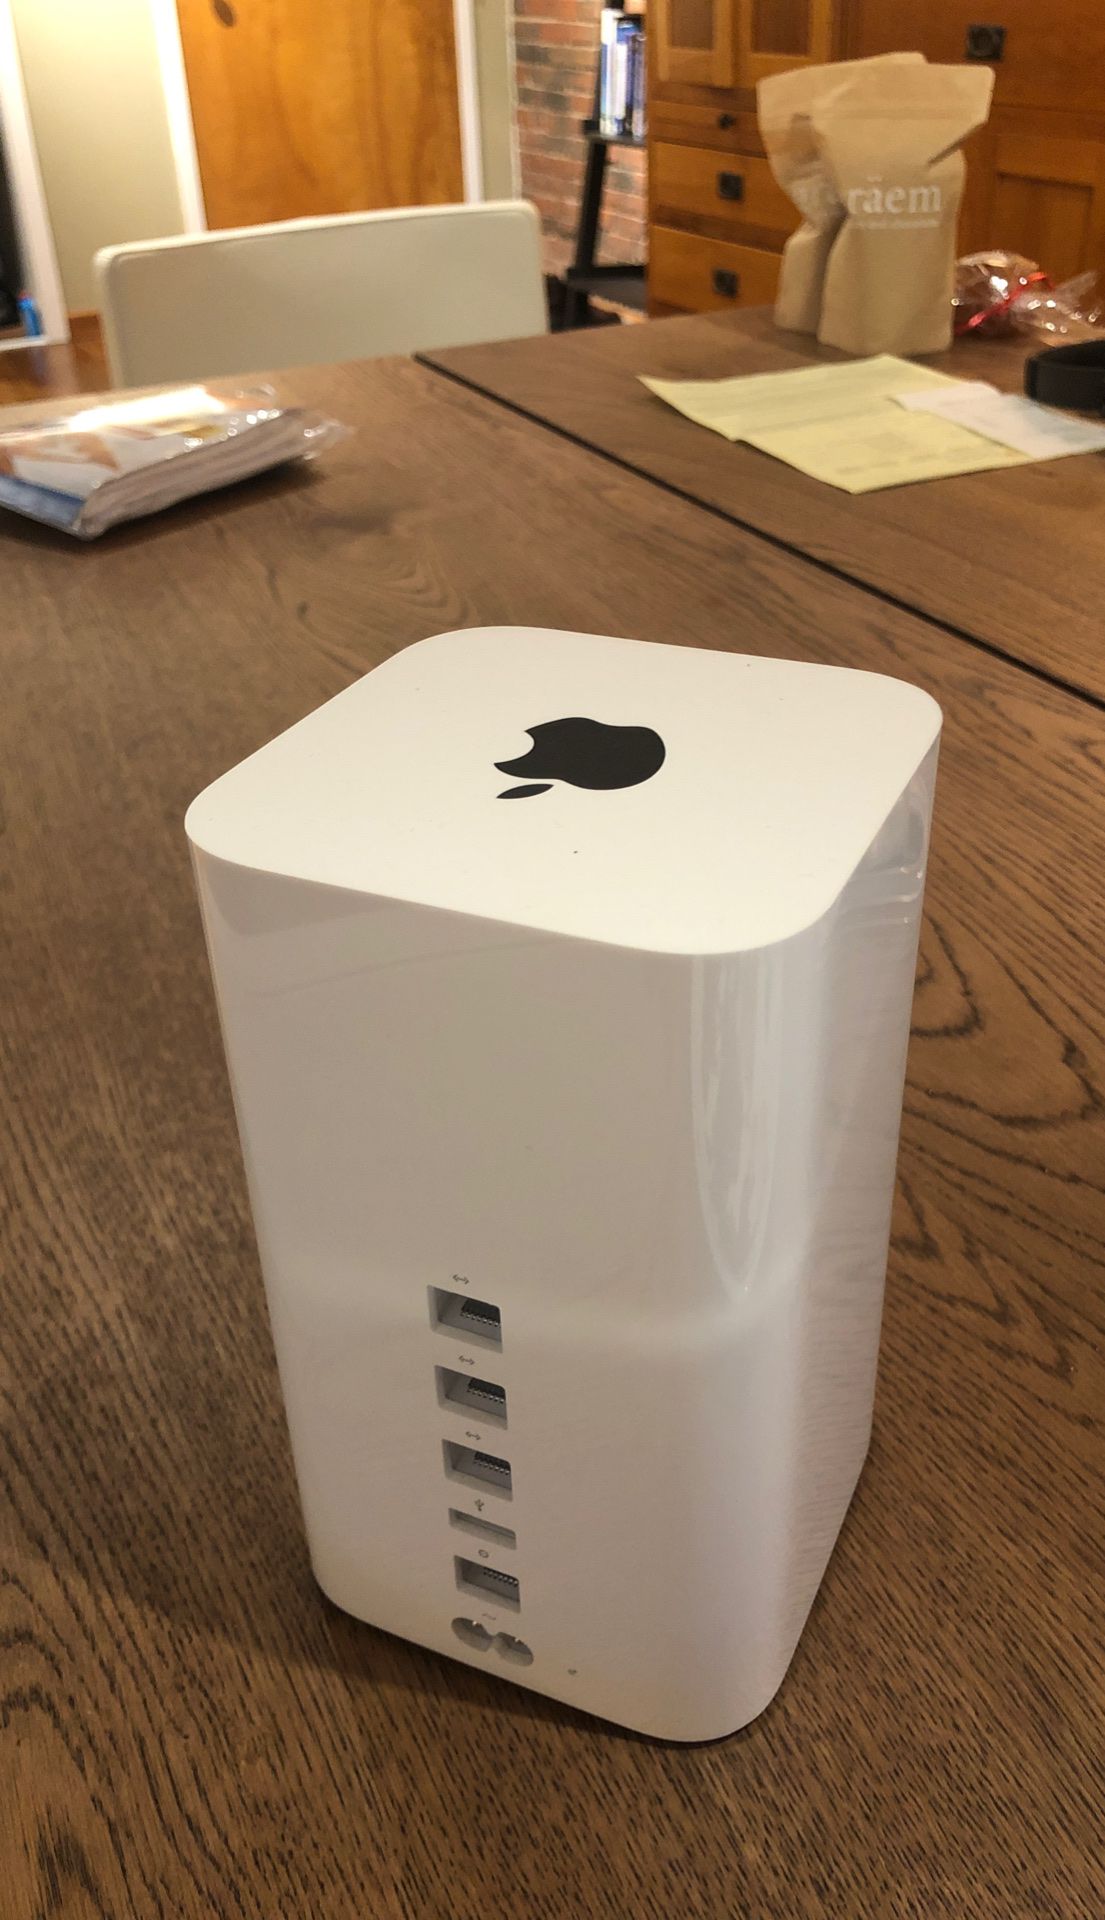 Apple router